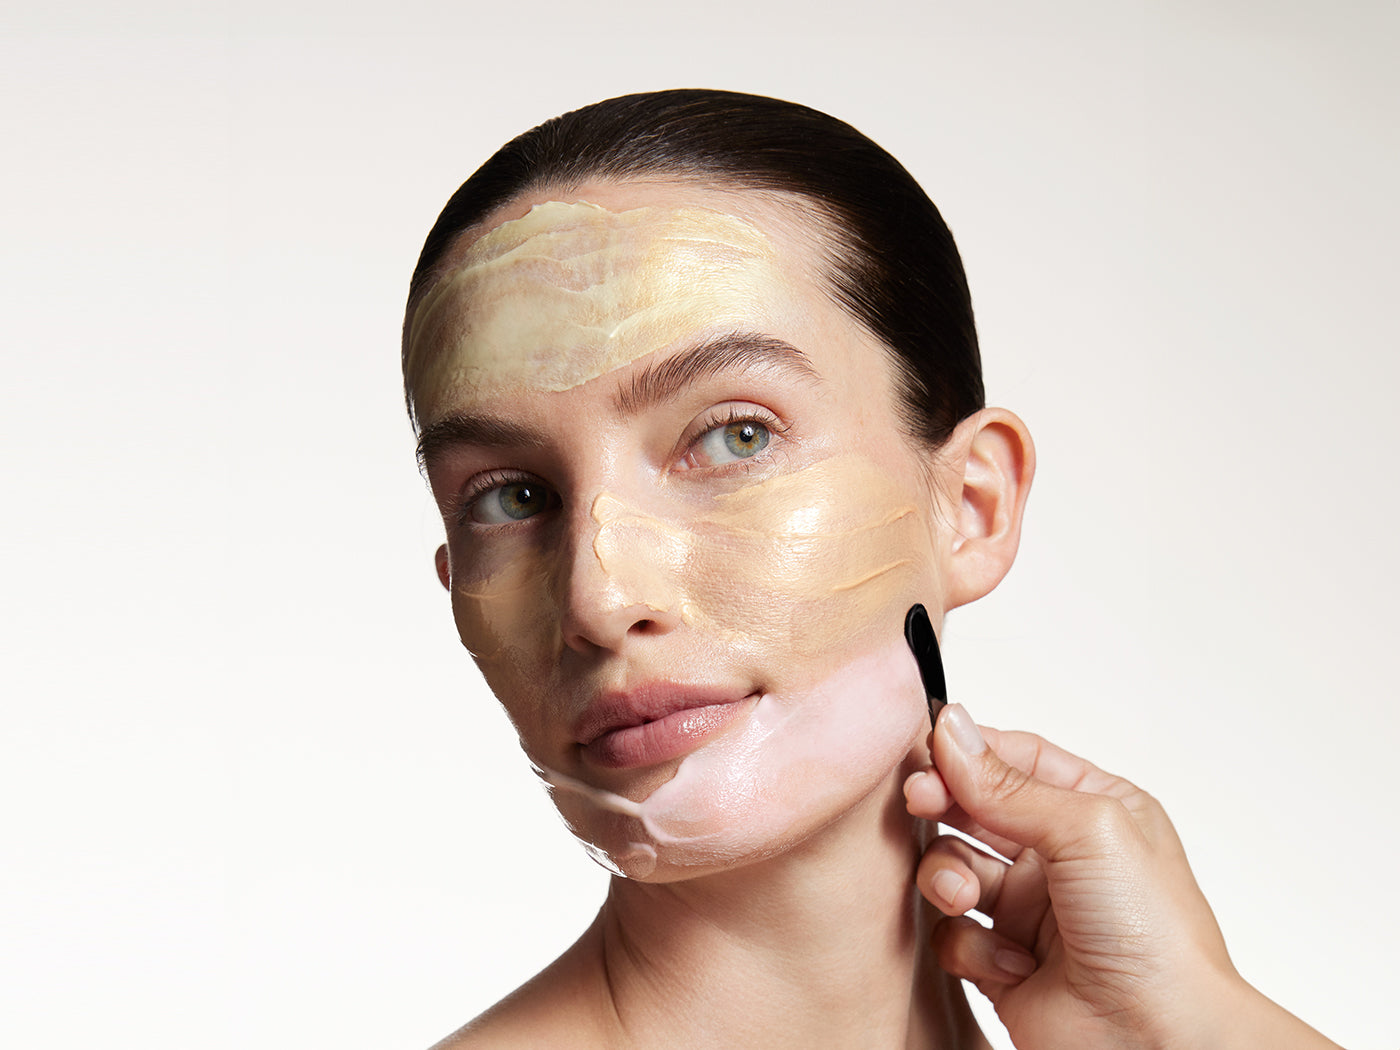 Apply #5 The Mask to the chin and jawline to restore clarity.